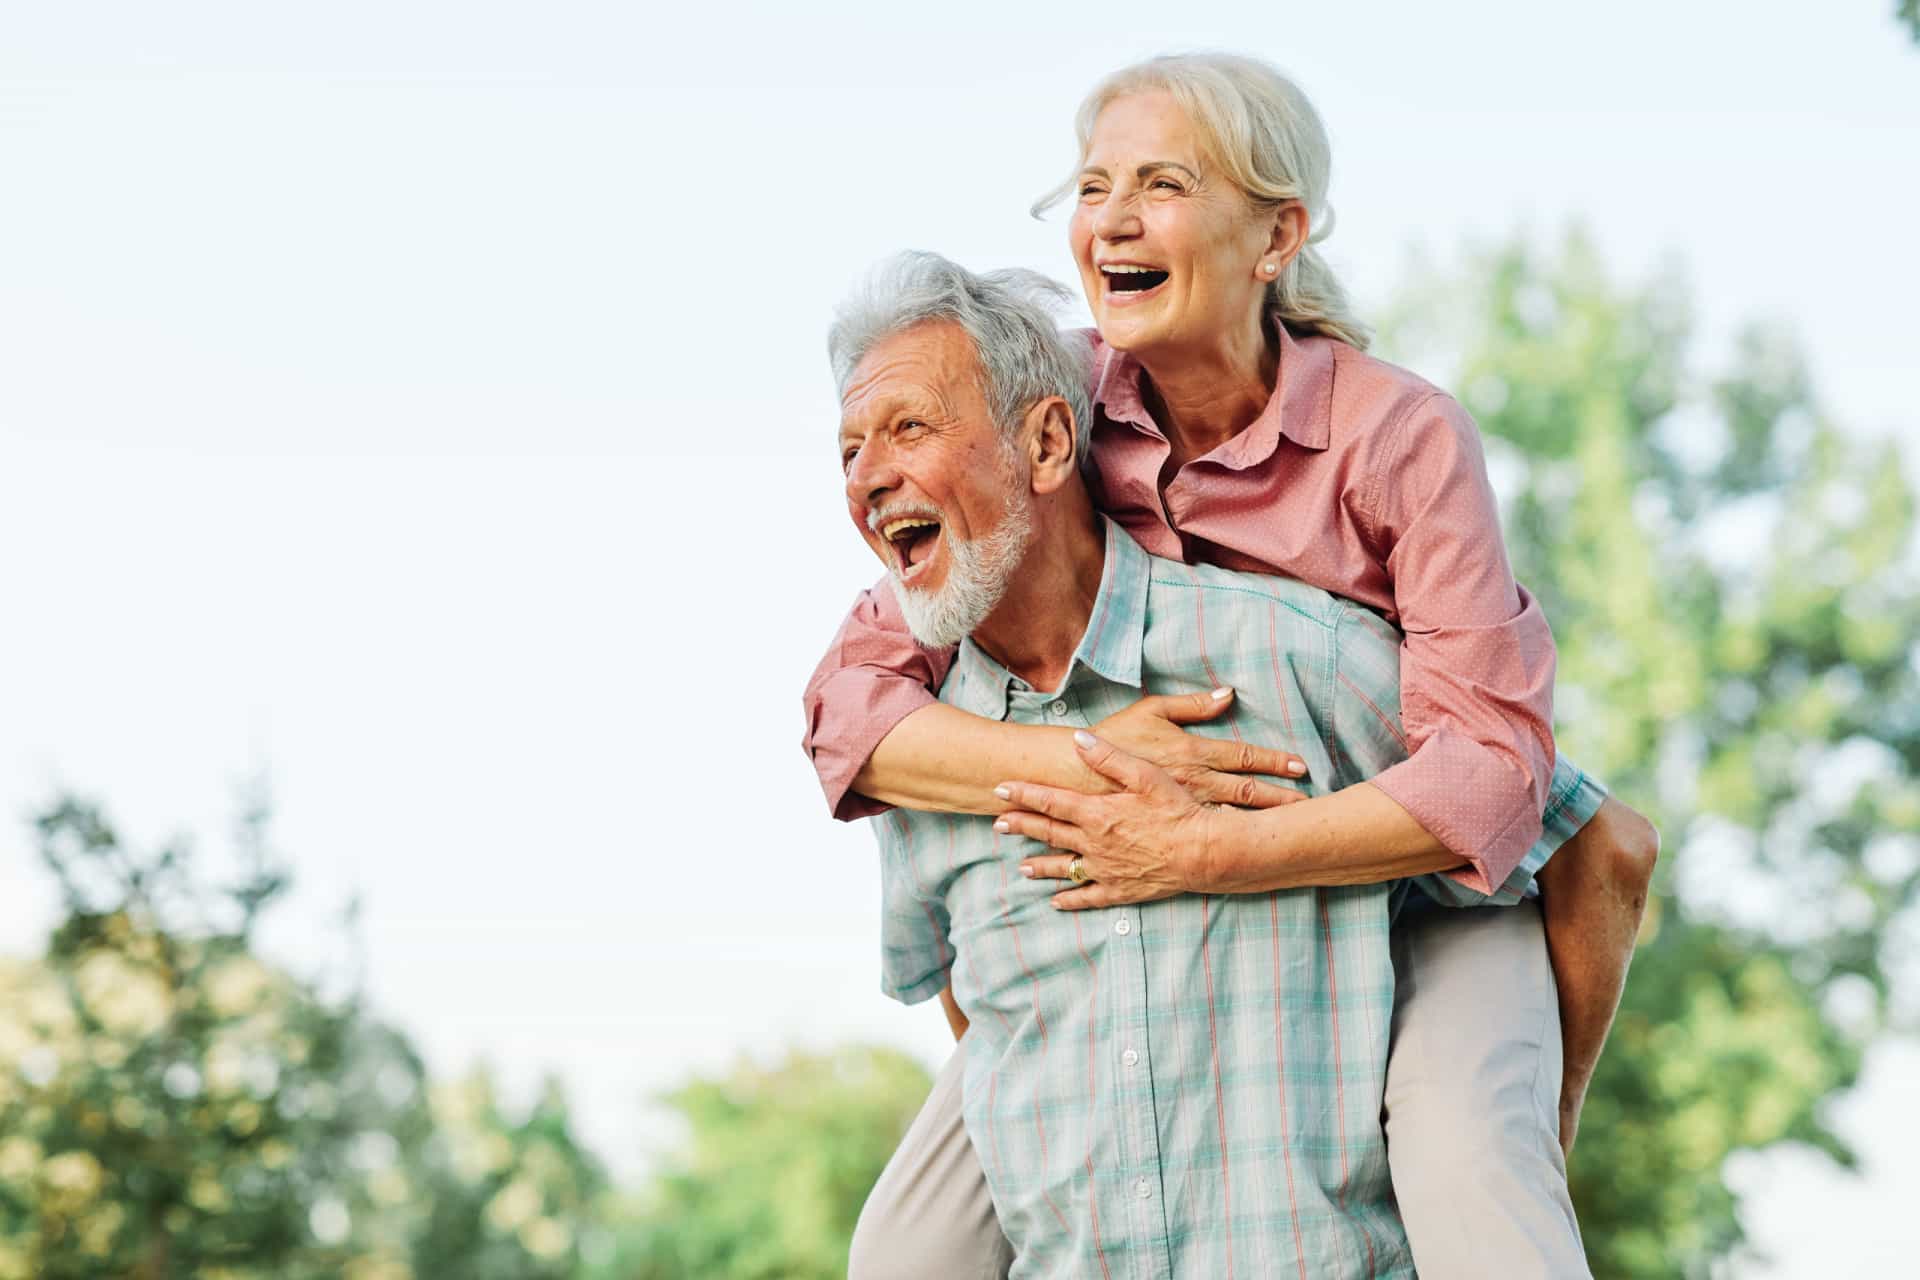 <p>Around the world, living conditions have dramatically improved thanks to modern medicine and technology. As such, people are living longer than ever before. <a href="https://www.starsinsider.com/travel/542055/do-you-live-in-one-of-the-worlds-happiest-countries" rel="noopener">Several countries</a> have many centenarians living in them now, with the likelihood of more appearing each and every year.</p> <p>But which, exactly, are the countries with the longest life expectancy? In this gallery, we rank the top 30. Click on to discover them all!</p><p>You may also like:<a href="https://www.starsinsider.com/n/163621?utm_source=msn.com&utm_medium=display&utm_campaign=referral_description&utm_content=582401en-us"> The most famous kidnappings in history: where are they now?</a></p>